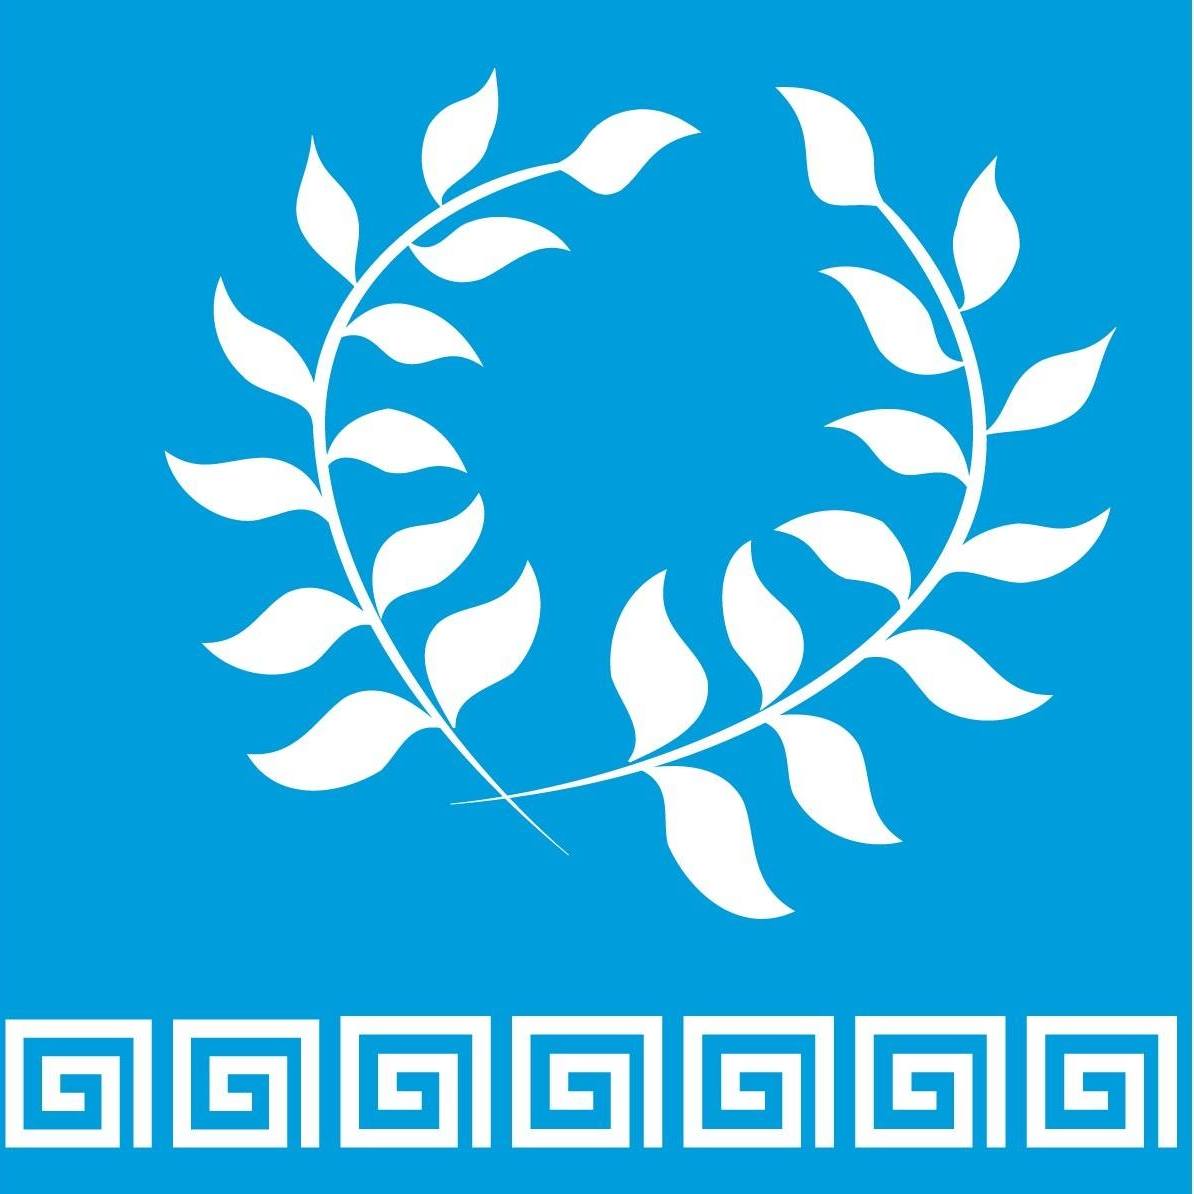 Greek Organization in Texas - Hellenic Cultural Center of the Southwest